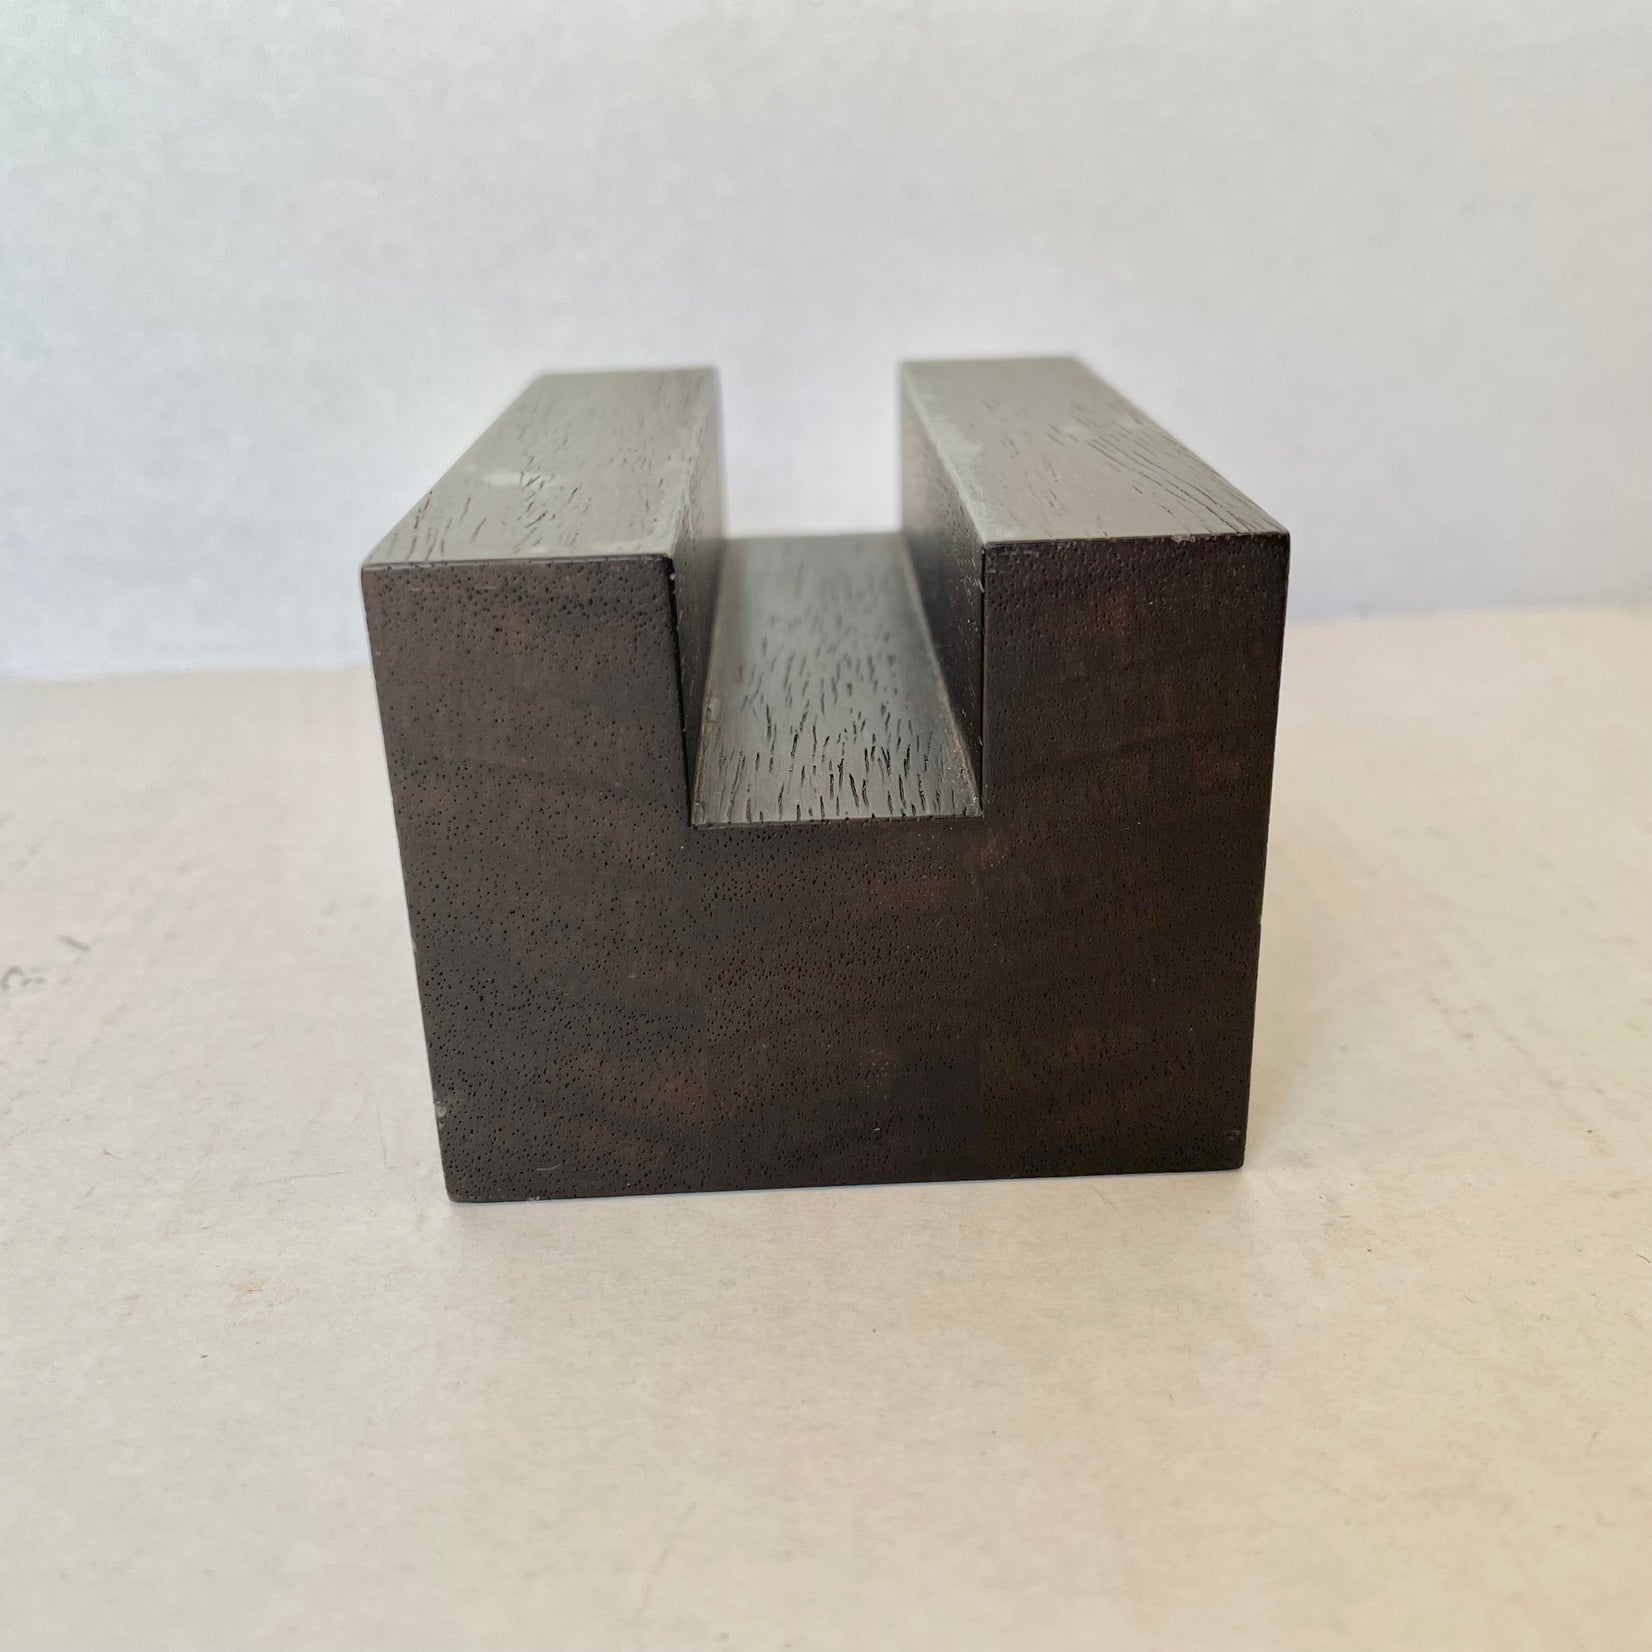 Hermes Wood and Leather Business Card Holder, 2000s France